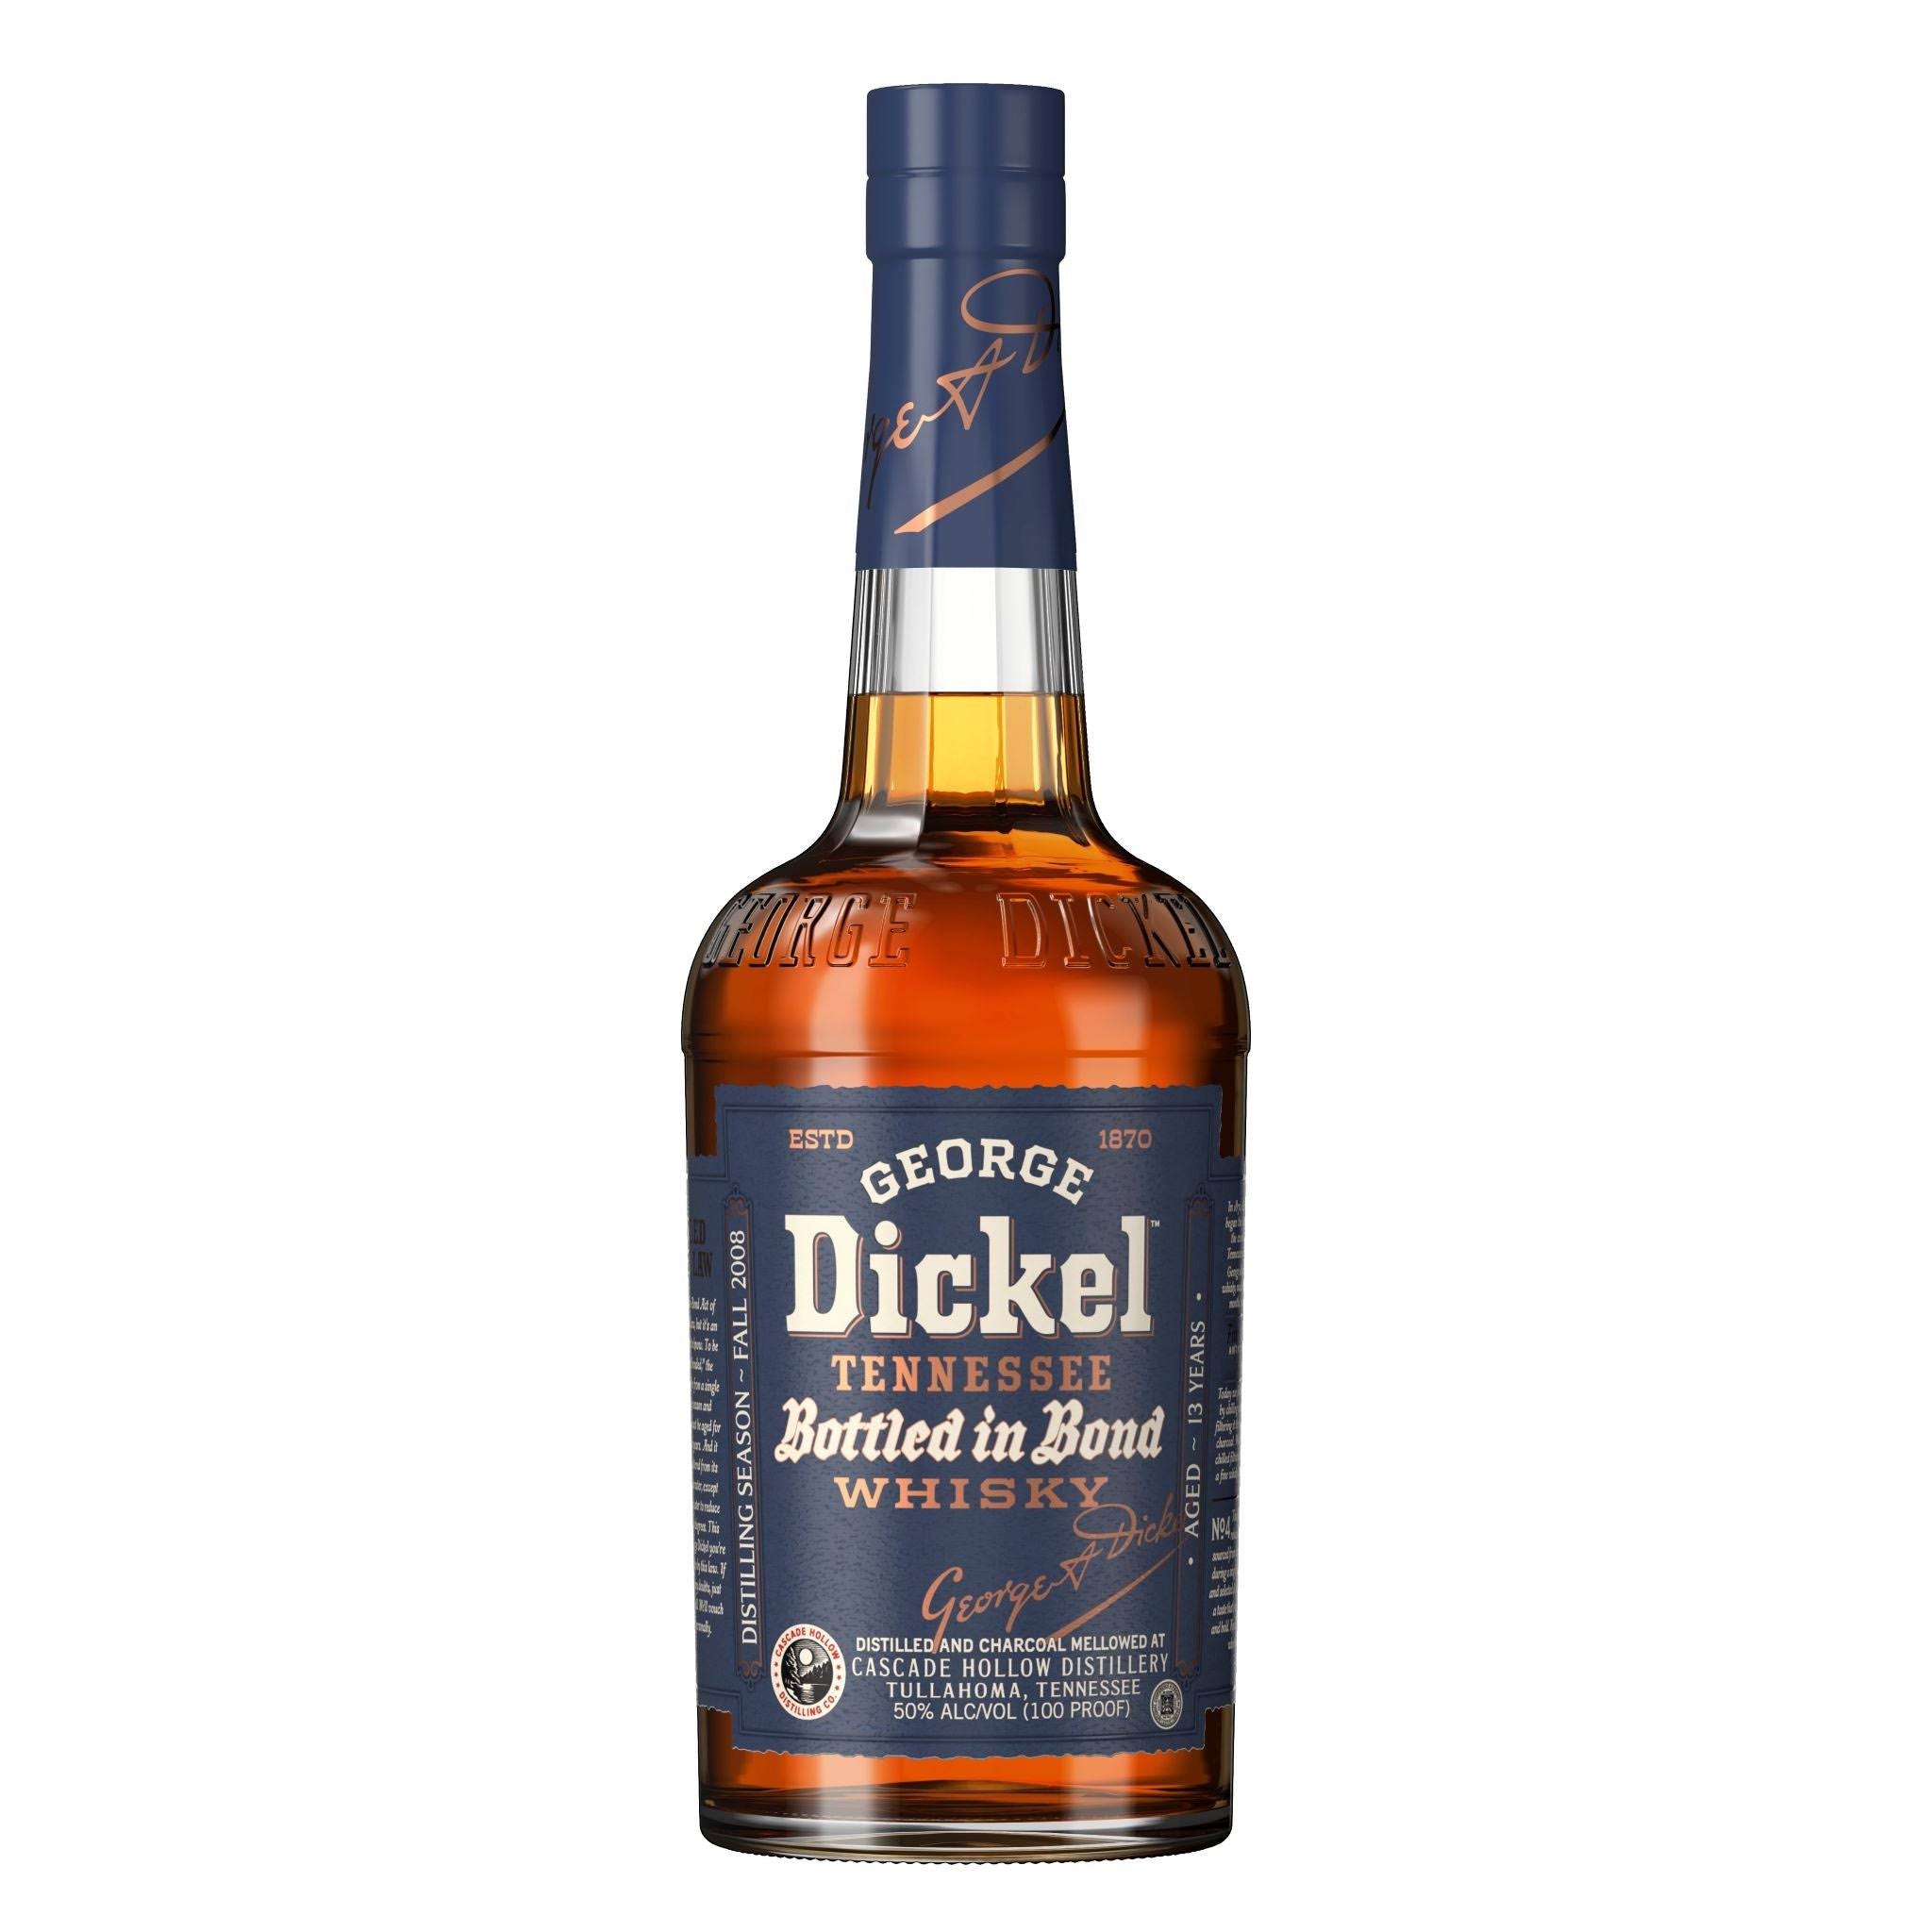 George Dickel - 13 Year Bottled in Bond Tennessee Whisky (750ml)